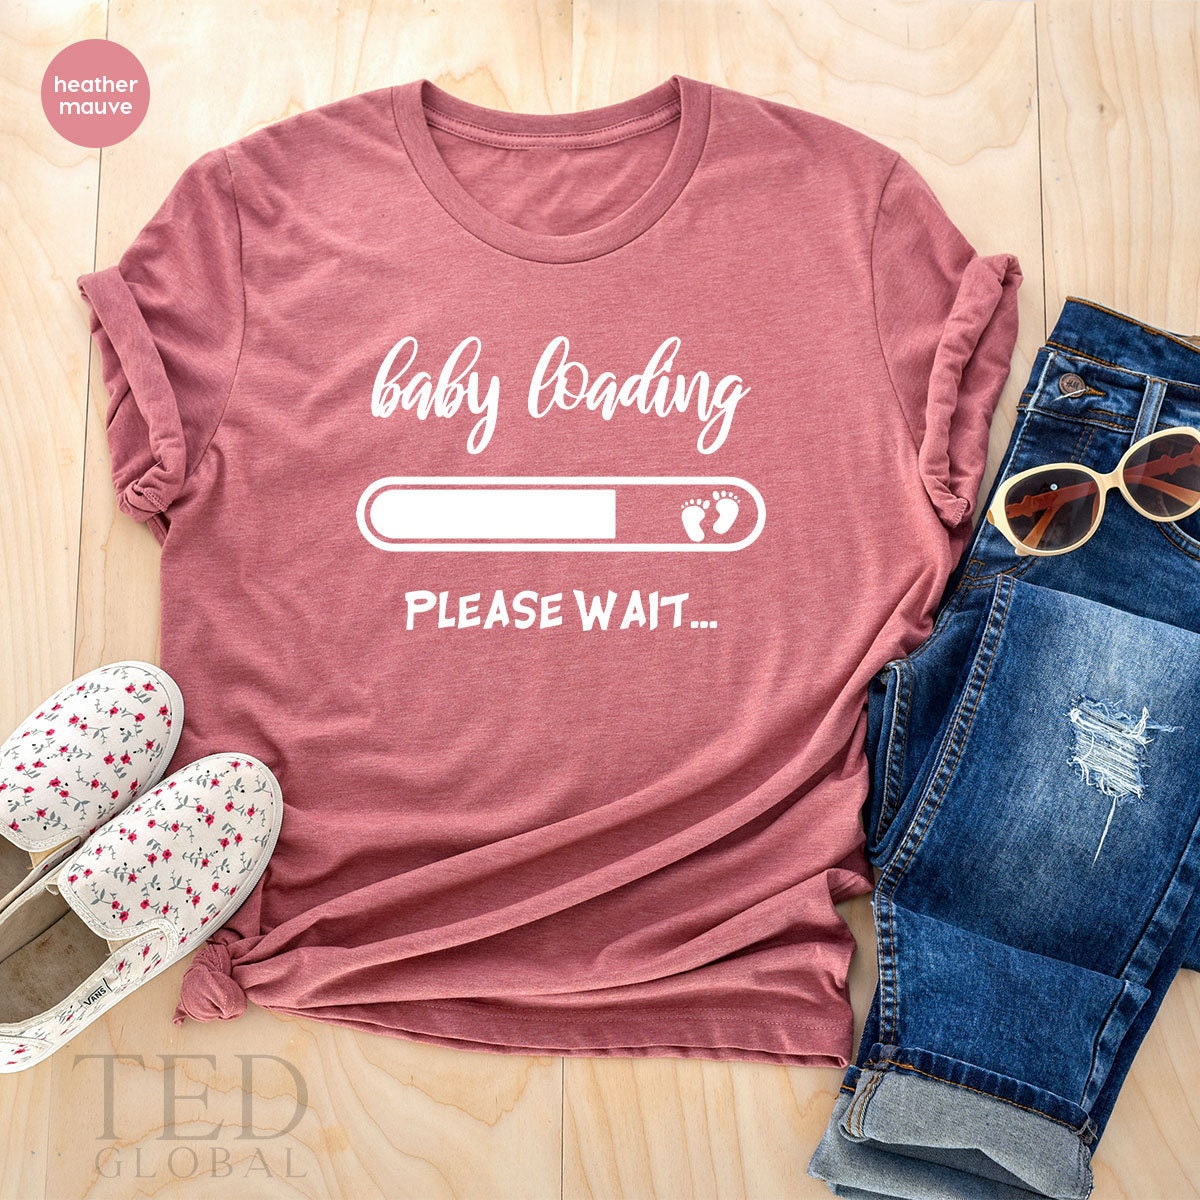 Maternity T-Shirts for Sale